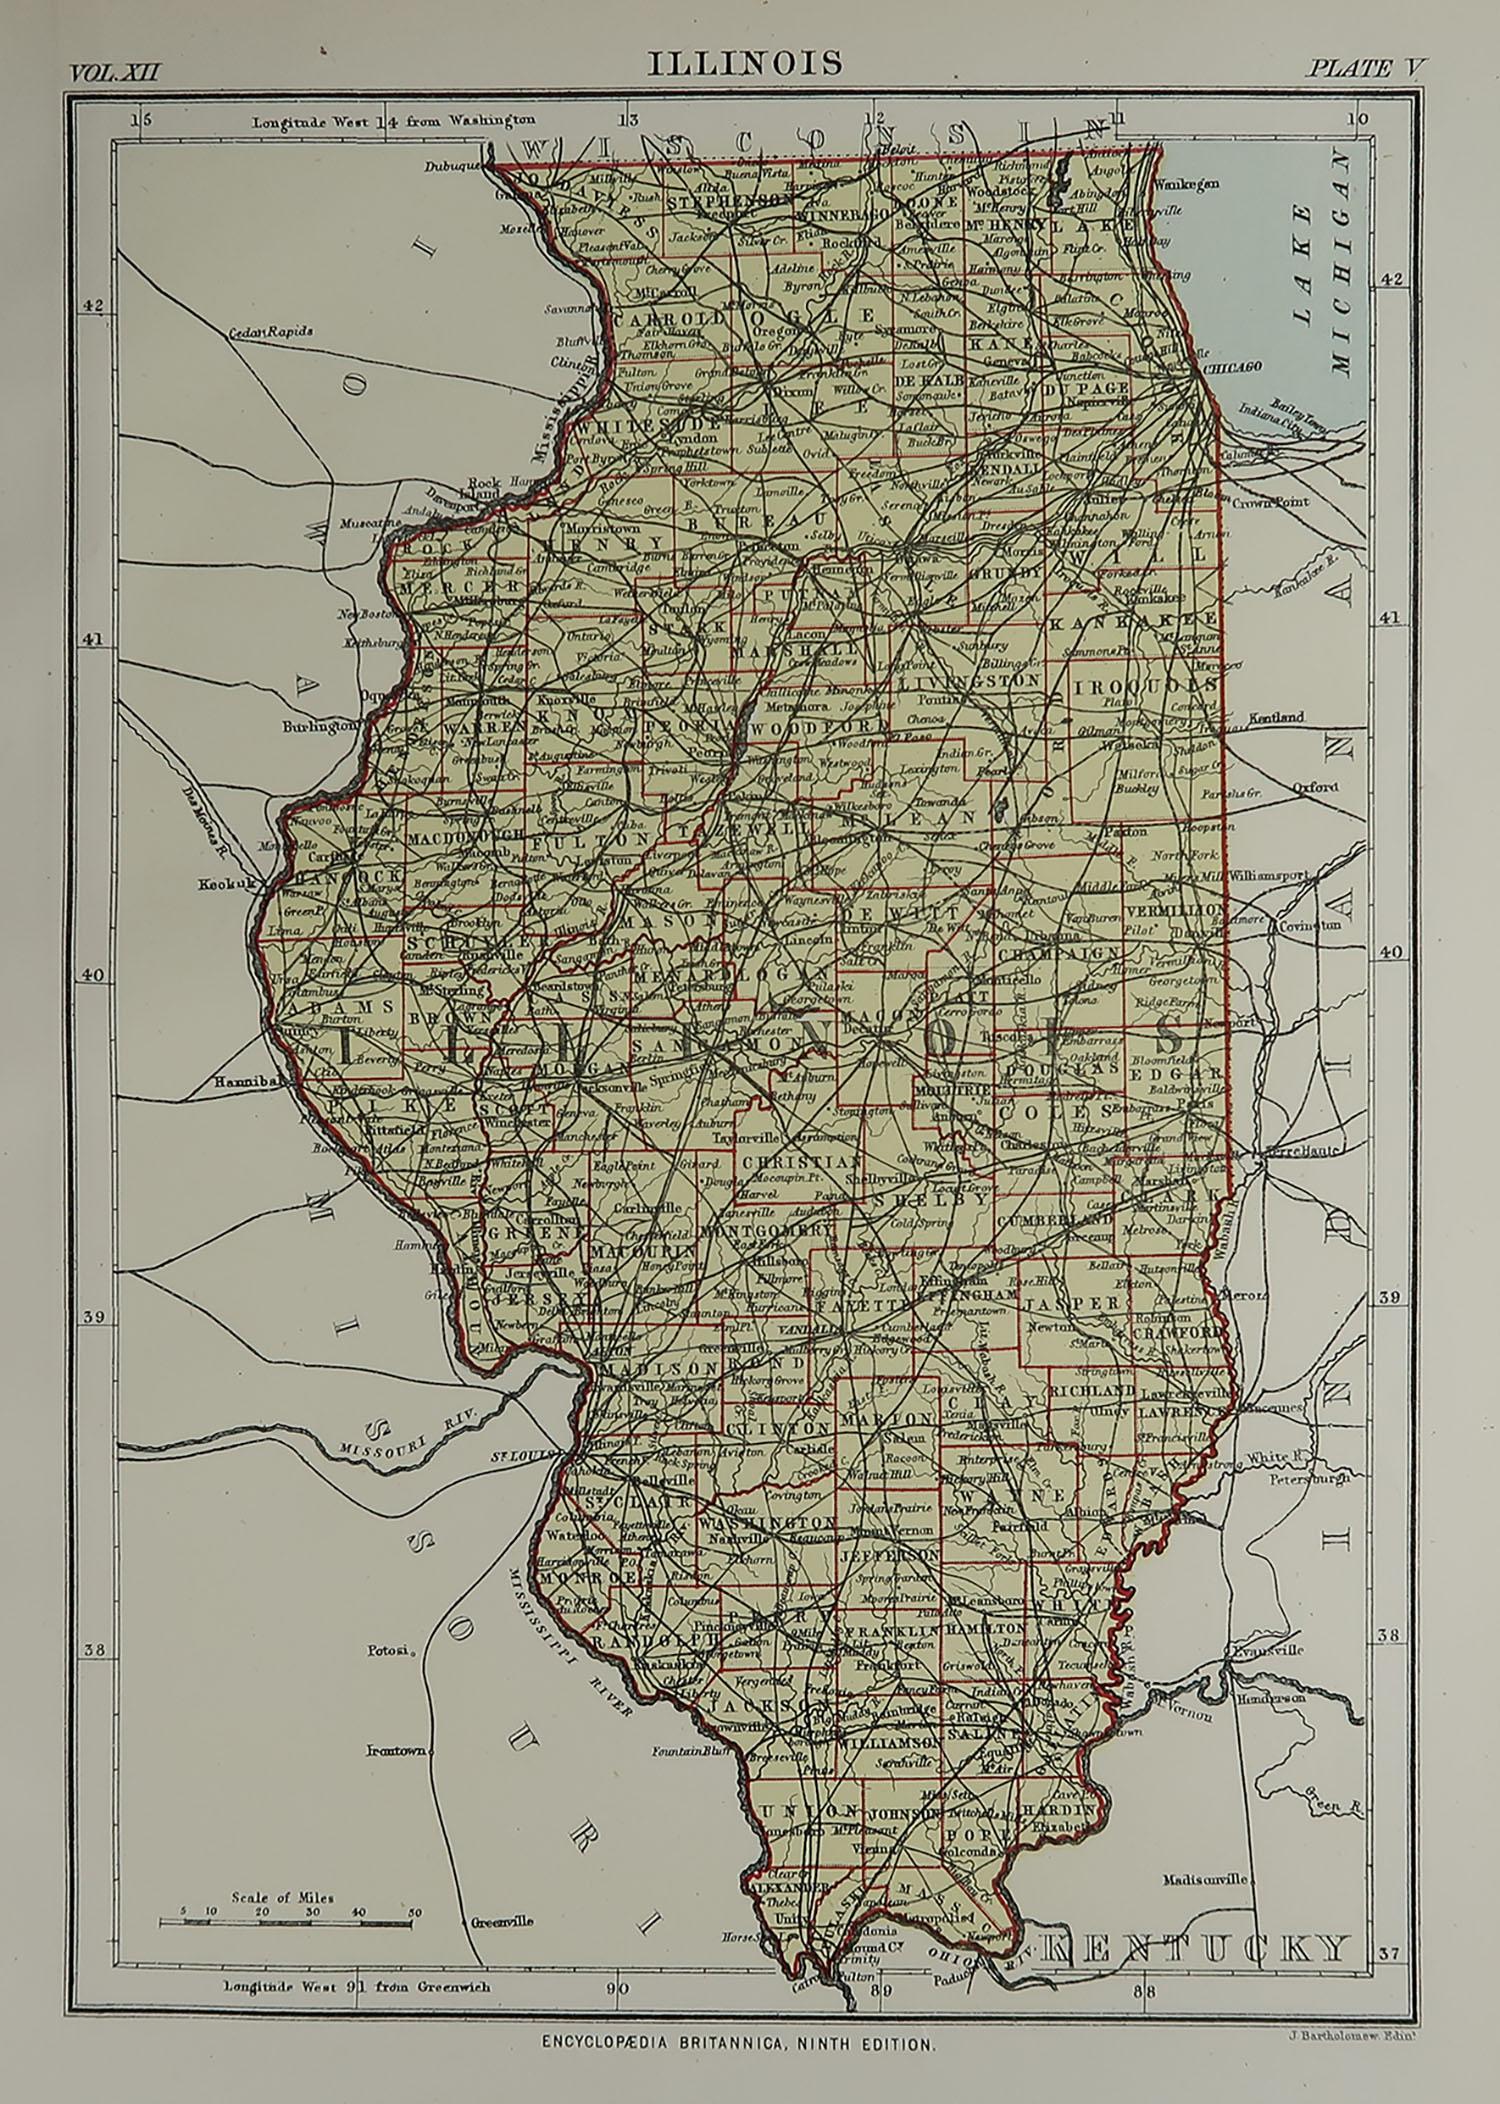 Great map of Illinois

Drawn and Engraved by W. & A.K. Johnston

Published By A & C Black, Edinburgh.

Original colour

Unframed.








